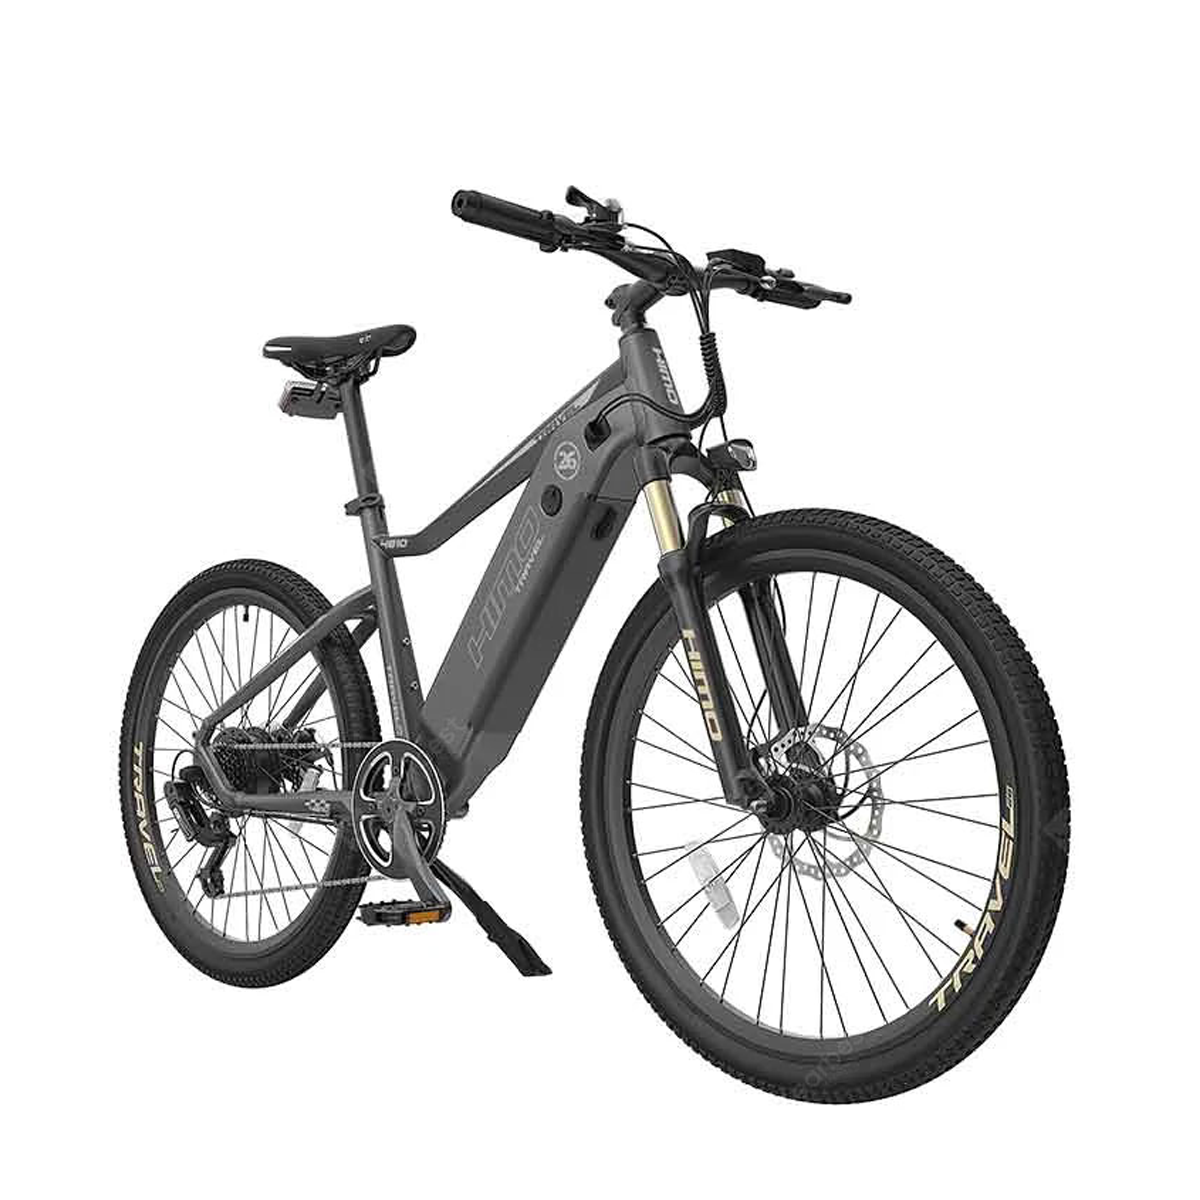 Xiaomi HIMO C26 Electric Bicycle - Silver